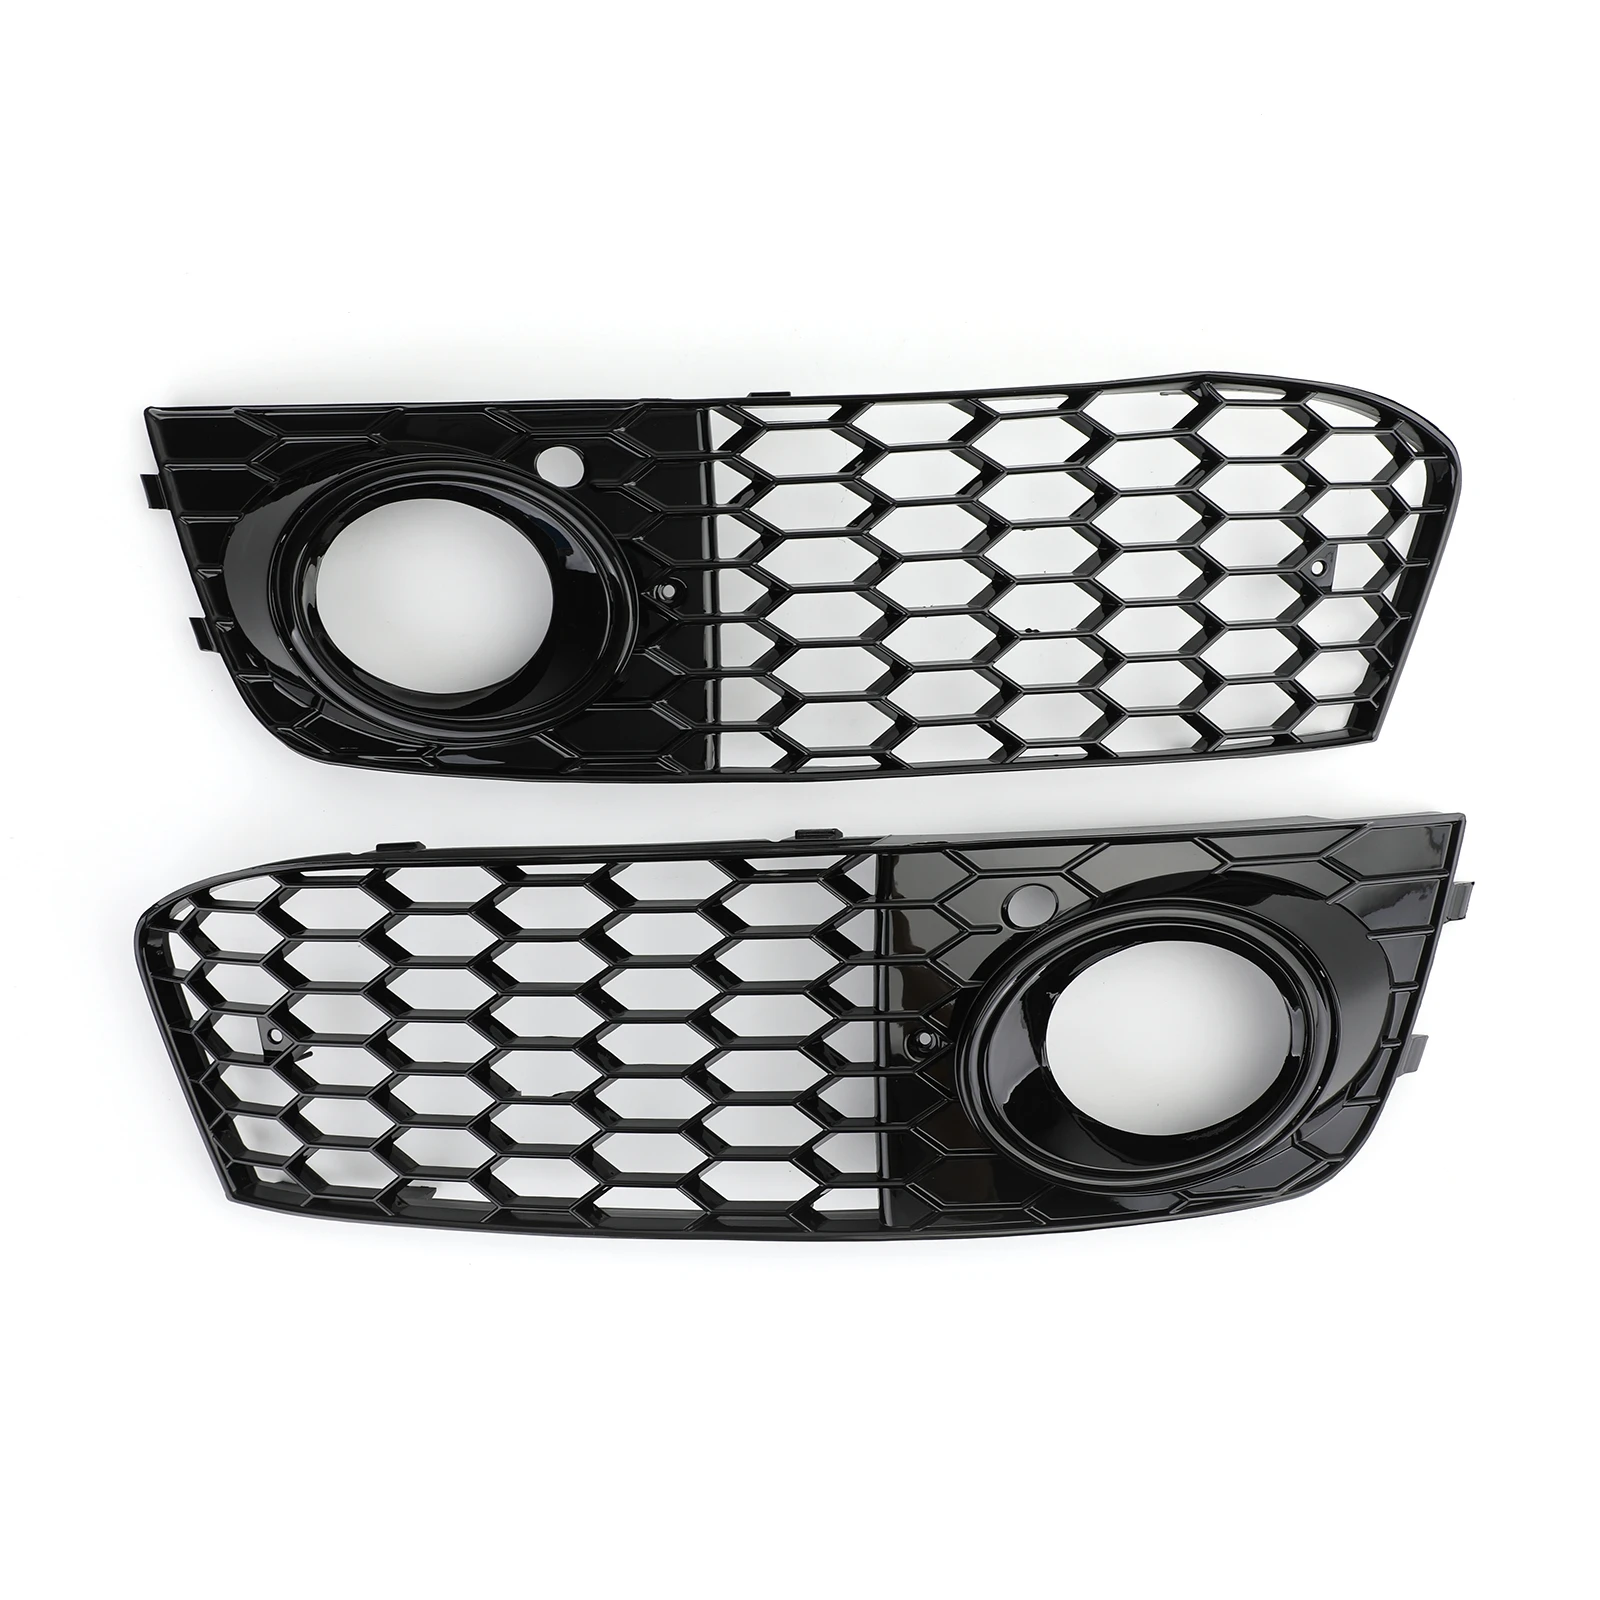 

Areyourshop Pair Honeycomb Mesh Fog Light Open Vent Grill Intake For Audi A4 B8 2009 2010 2011 2012, Black